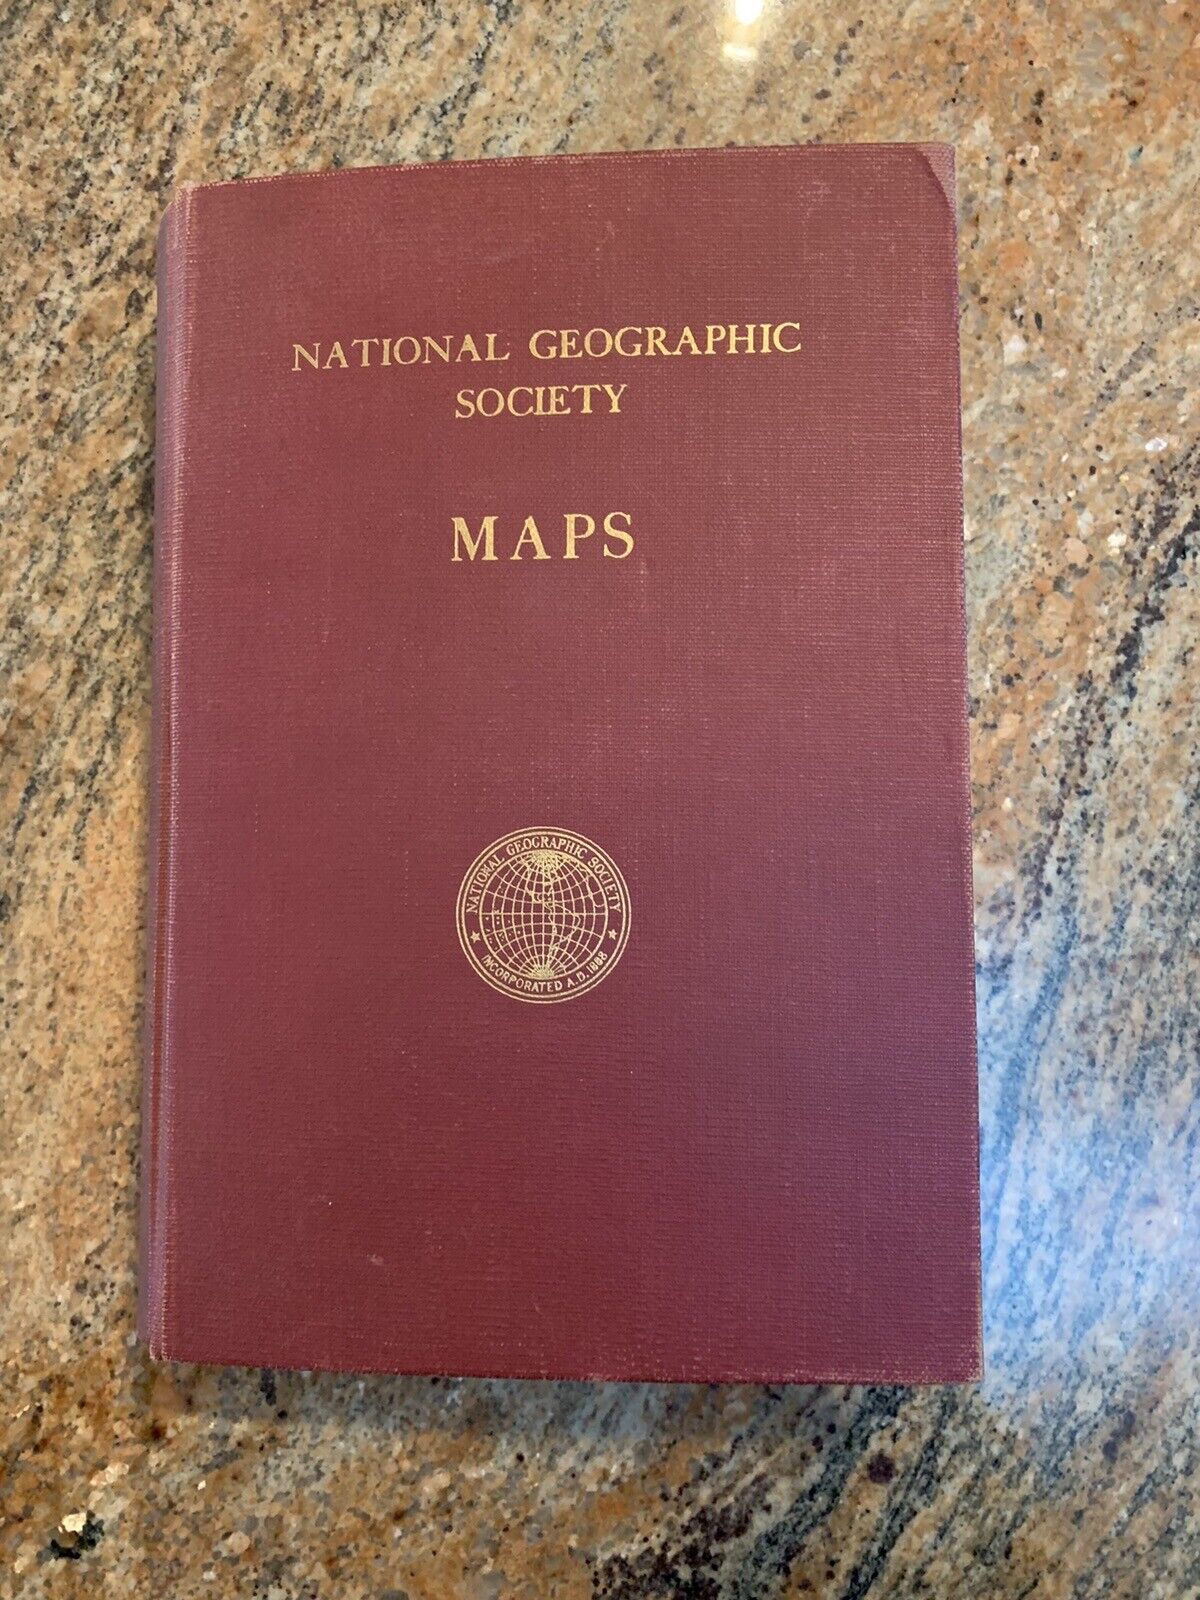 LOT OF 12 VINTAGE MAPS IN BOOK FOLDER NATIONAL GEOGRAPHIC MAGAZINE MAP 